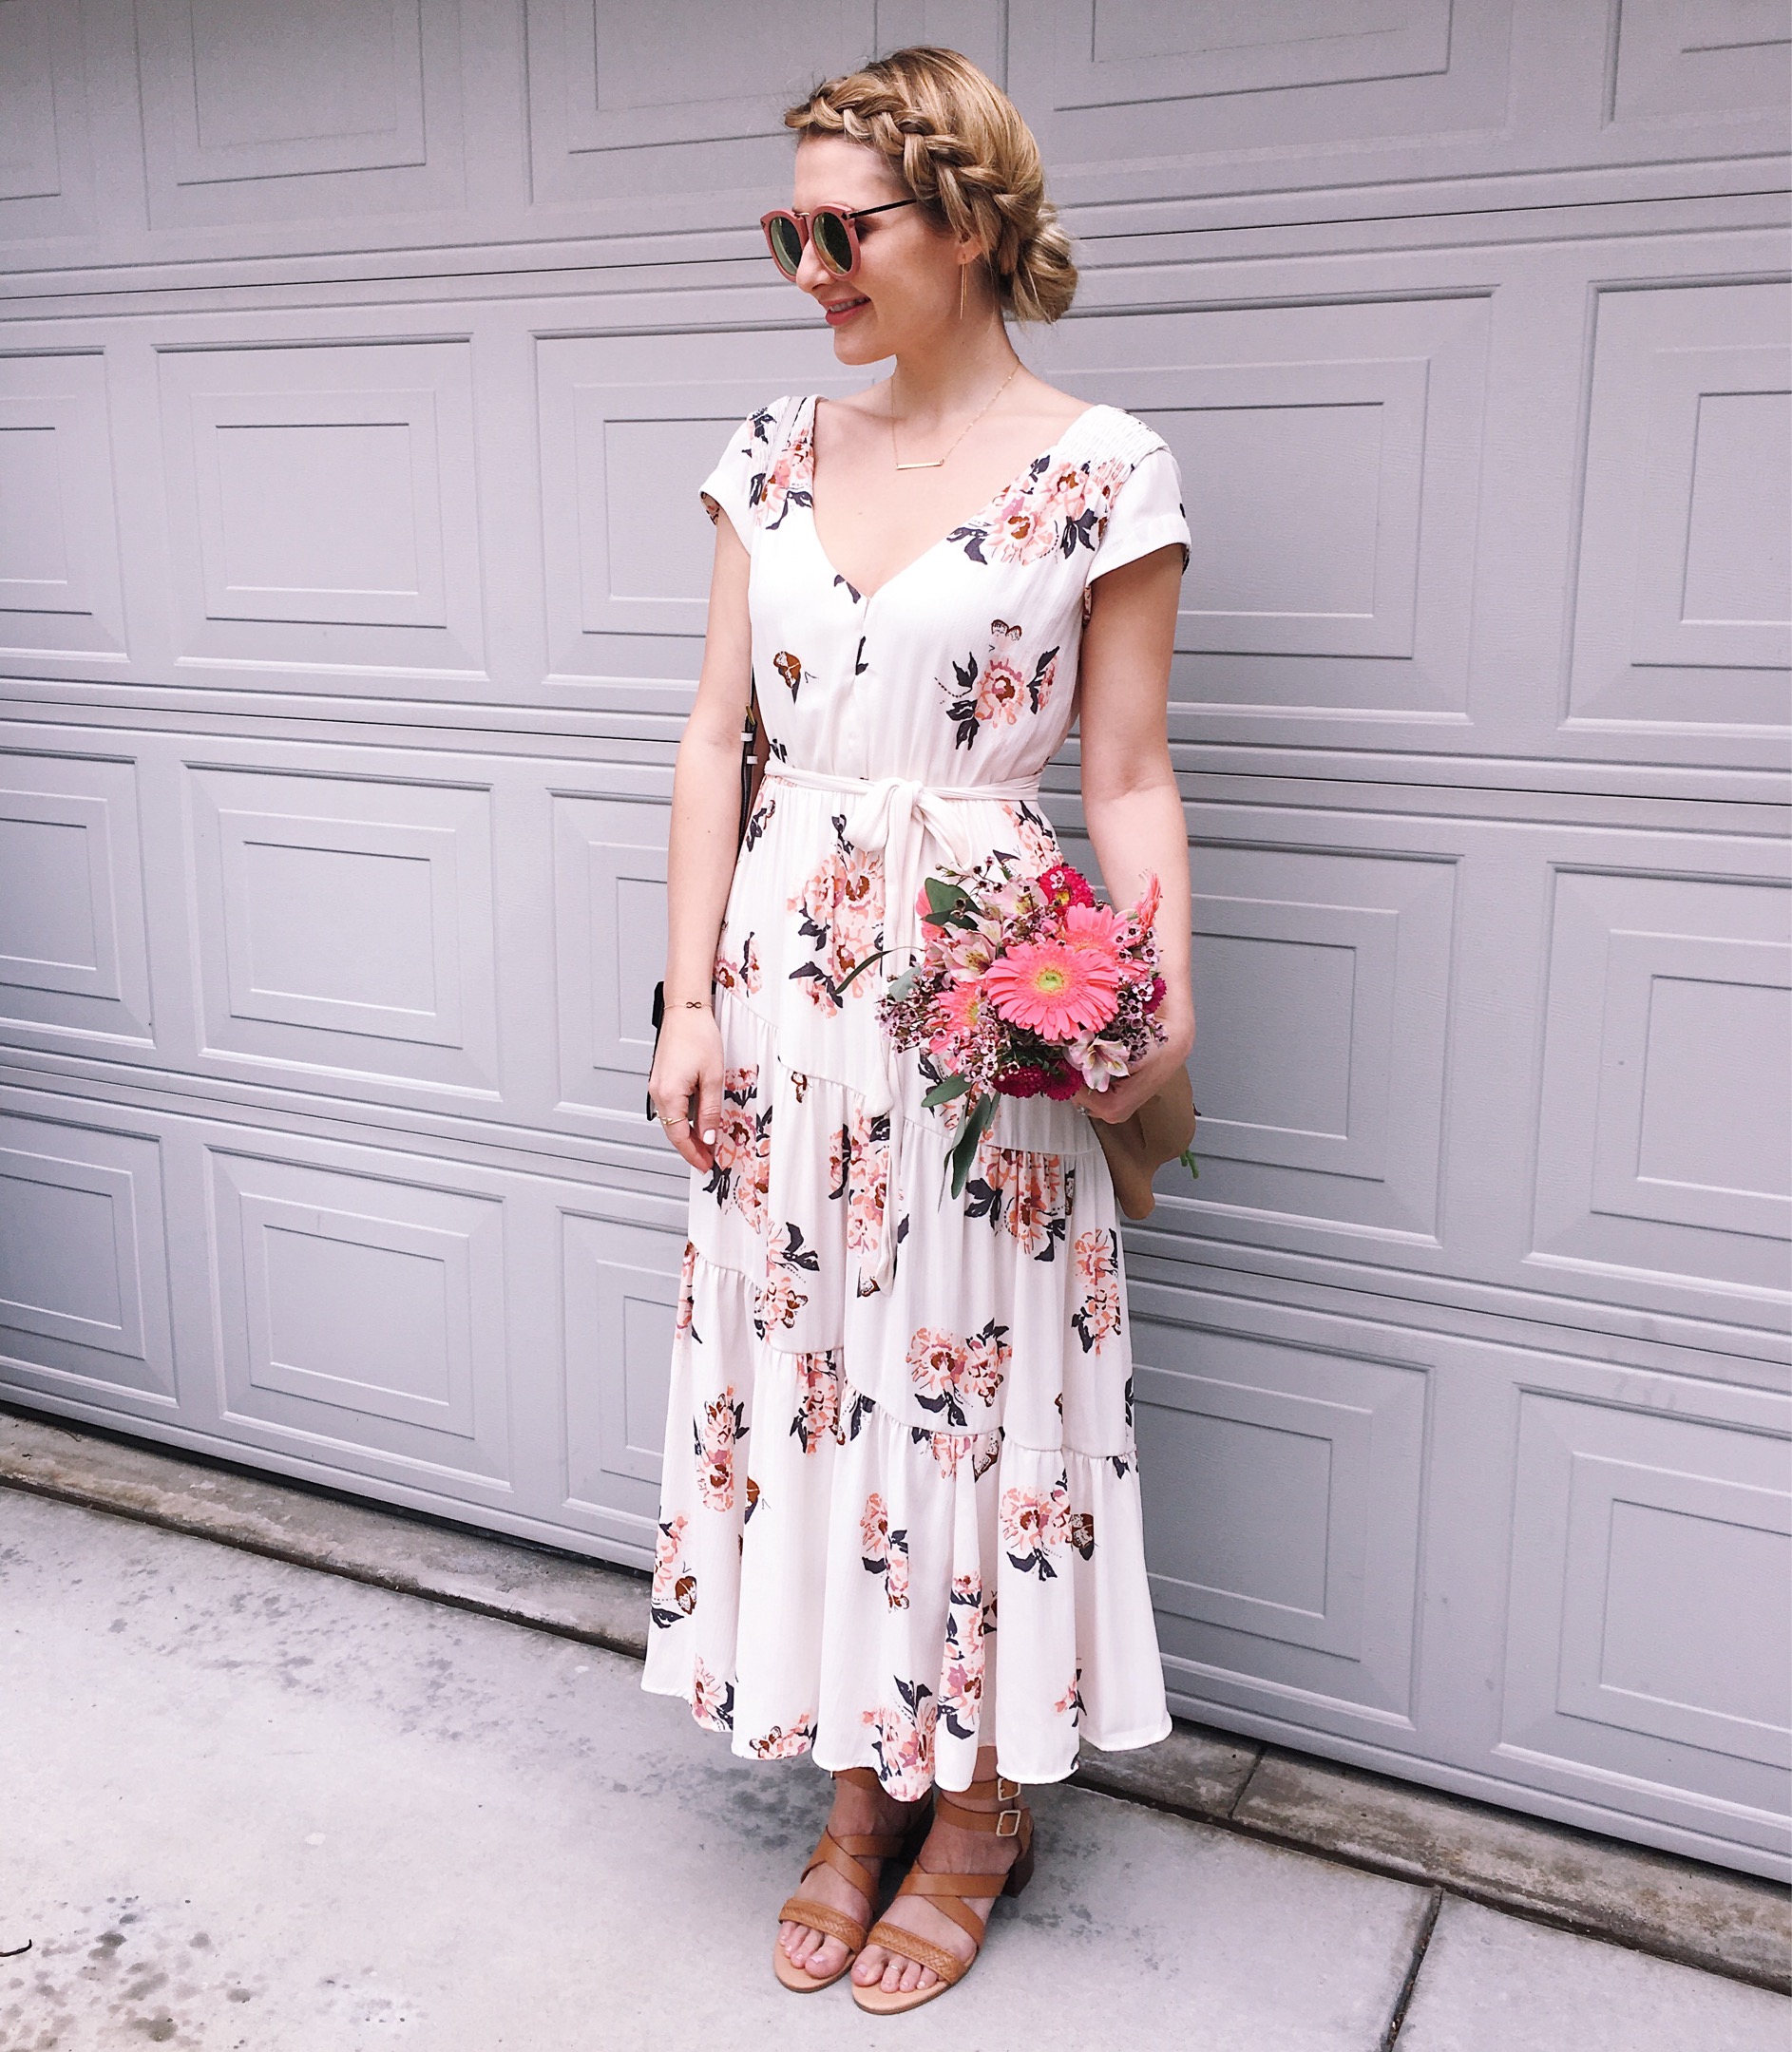 Two Floral Spring Outfits Under $100